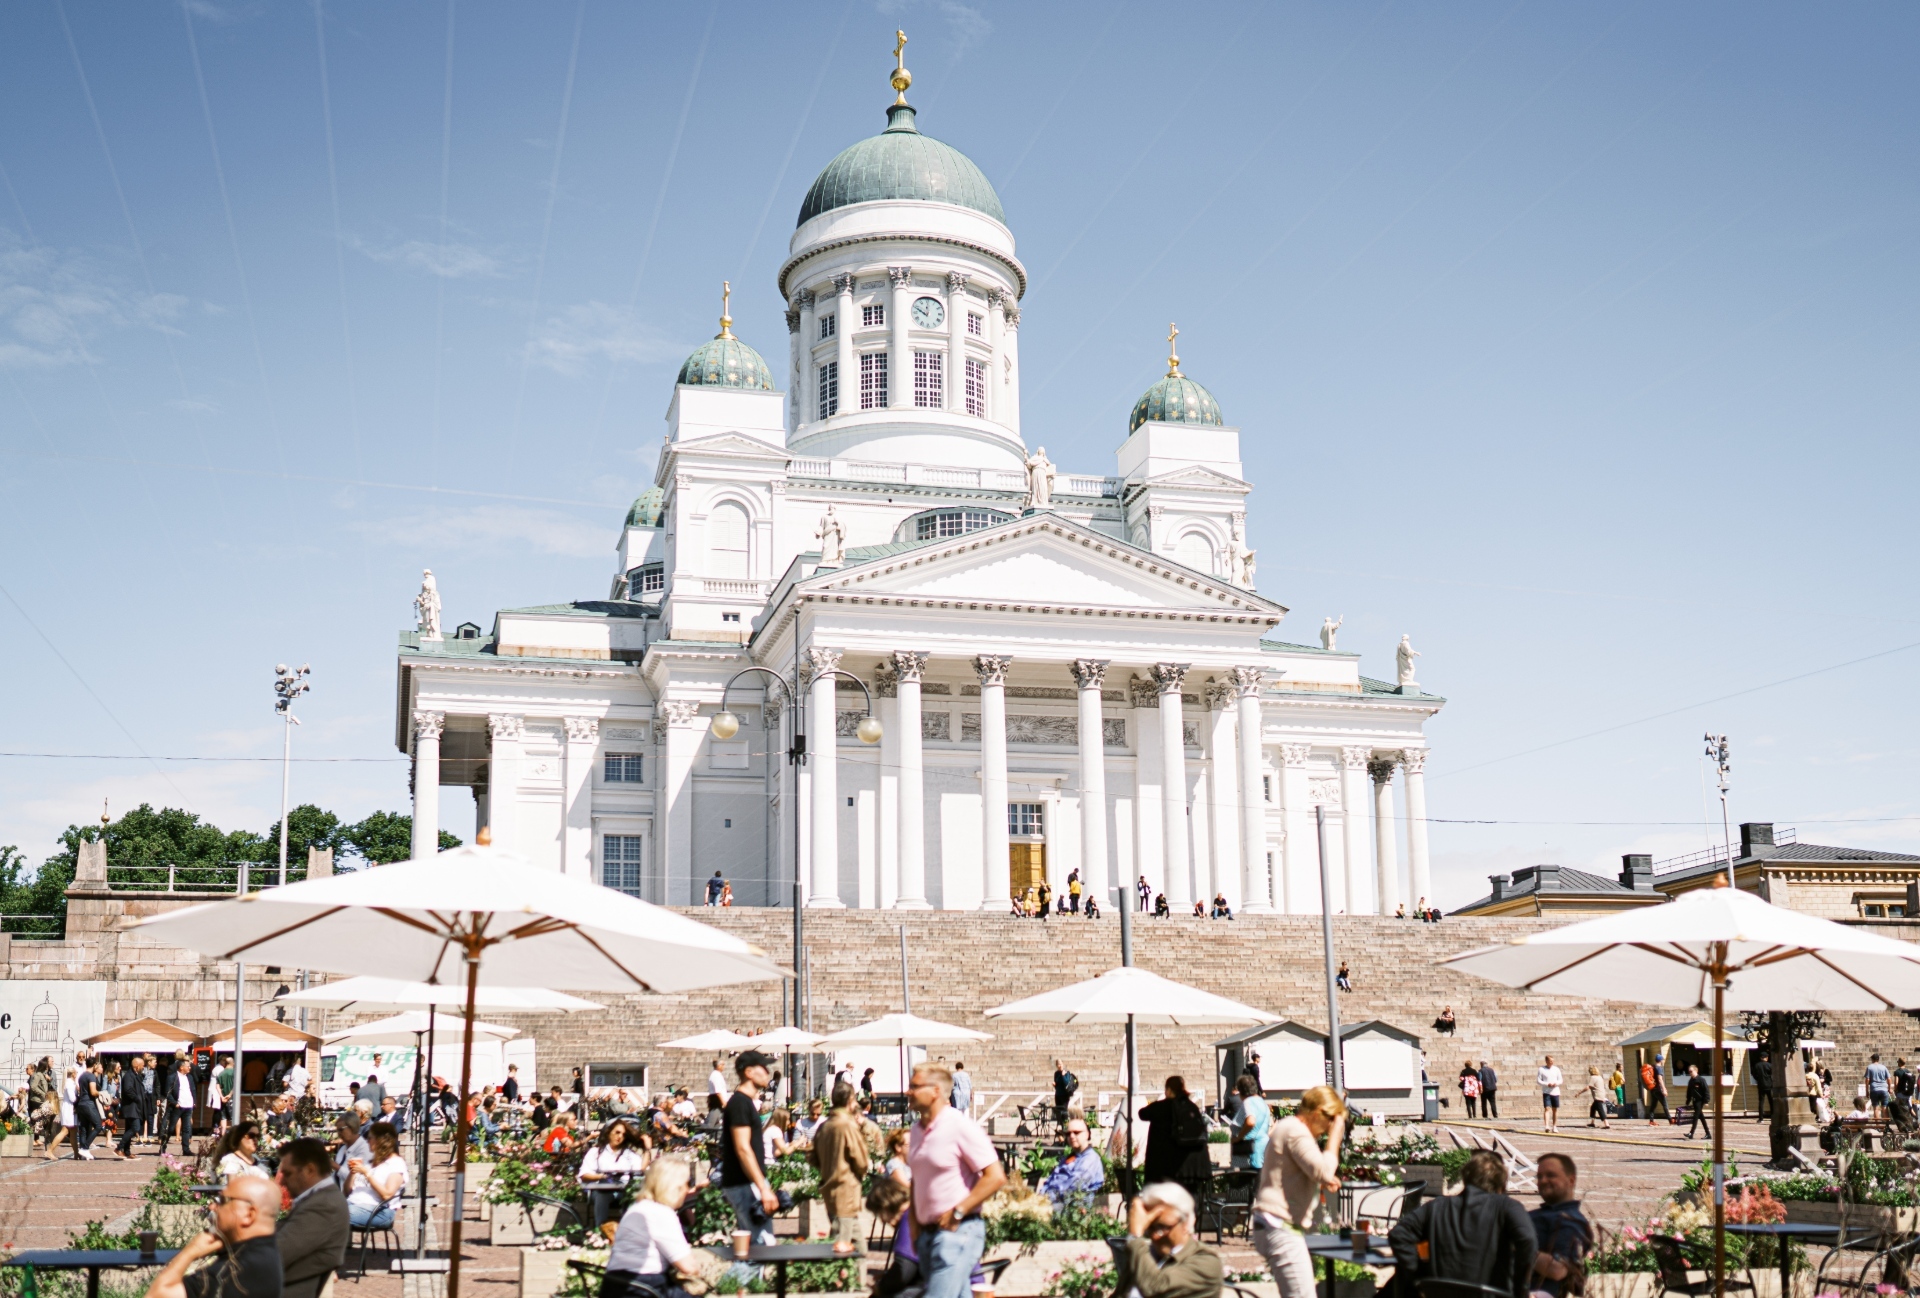 This square in Helsinki is now a huge restaurant